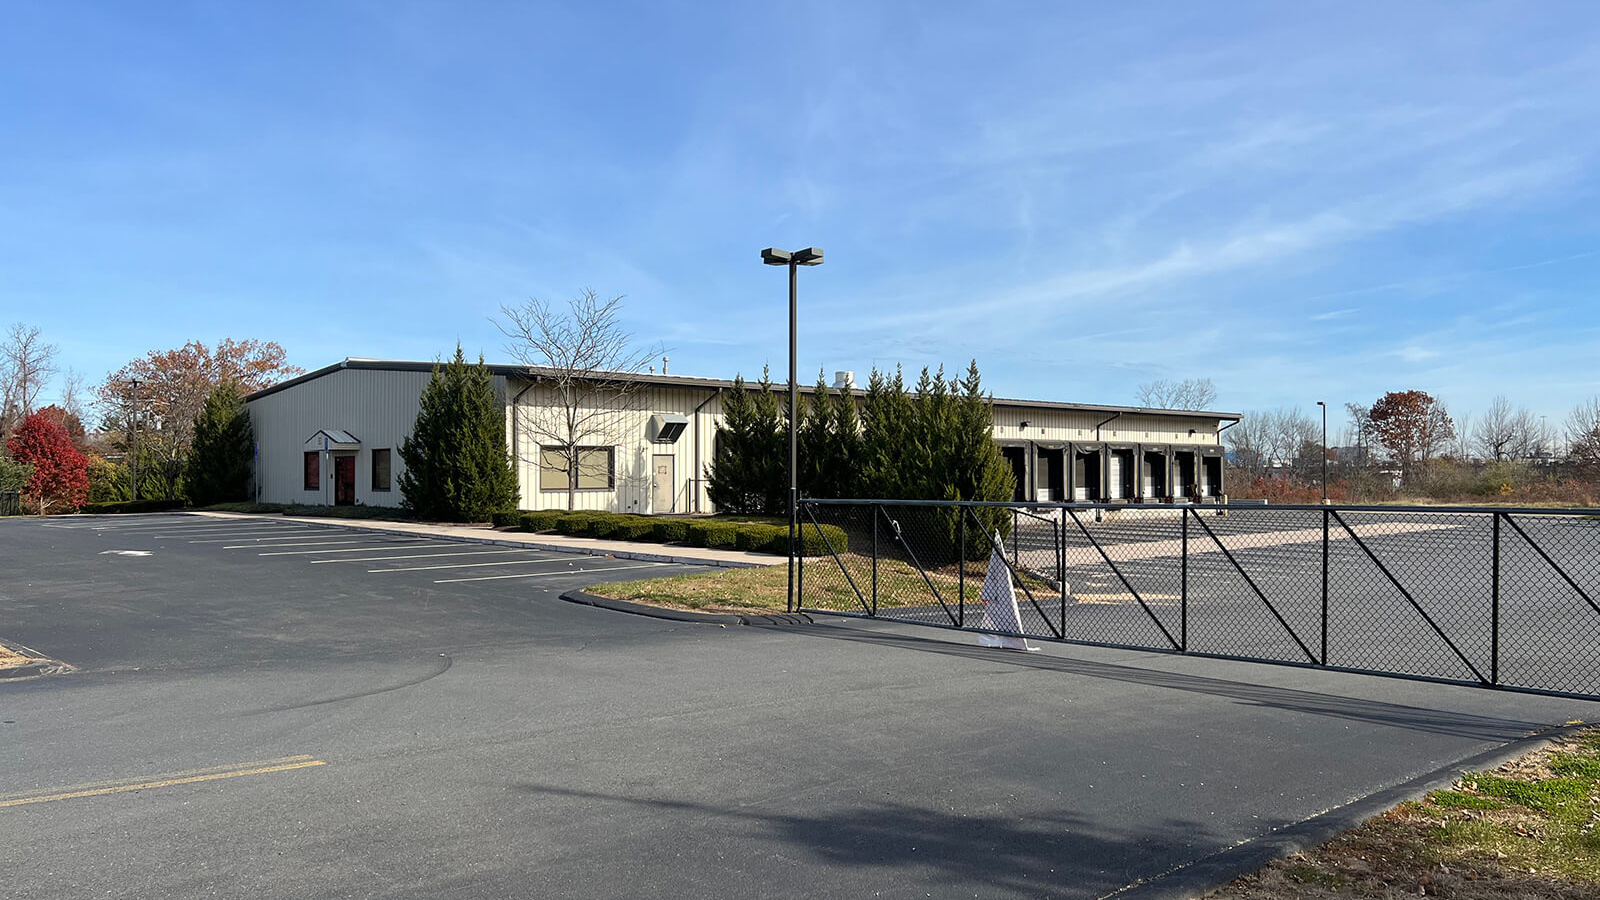 32 Kripes Road, E Granby, Connecticut 06026, Industrial,For Lease,Kripes Road,1362